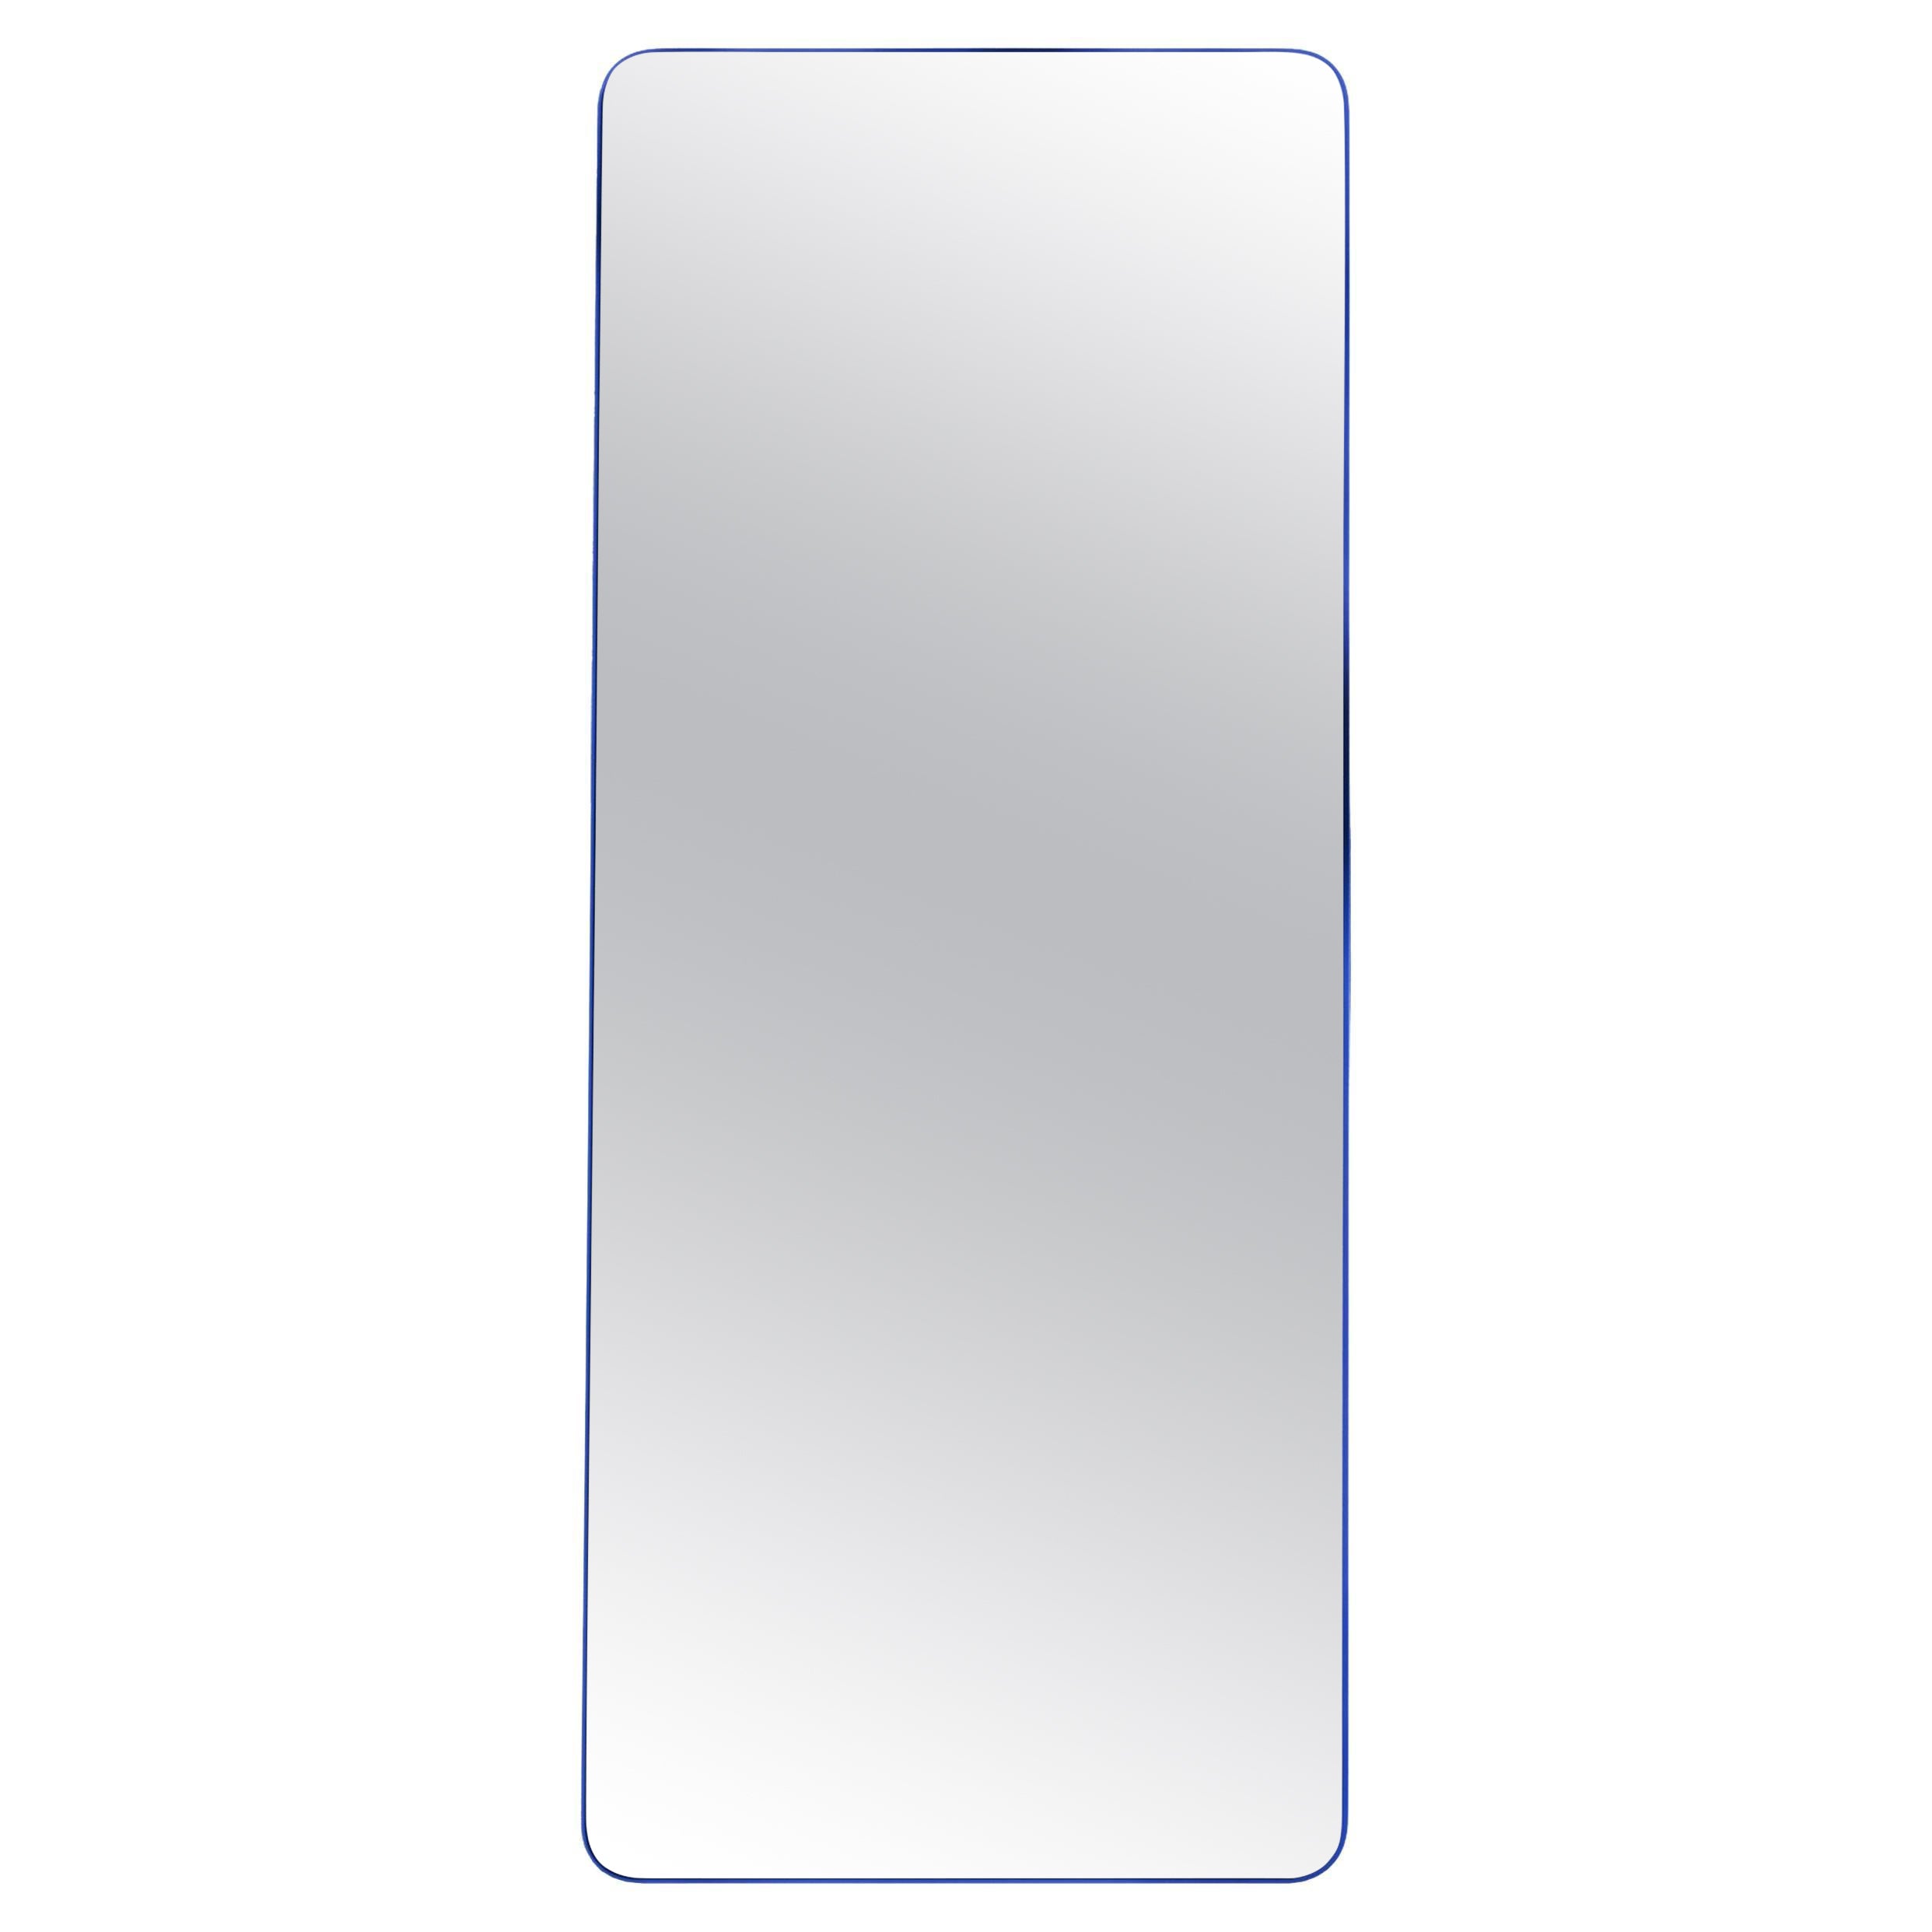 Contemporary Mirror 'Loveself 05' by Oitoproducts, Blue Frame